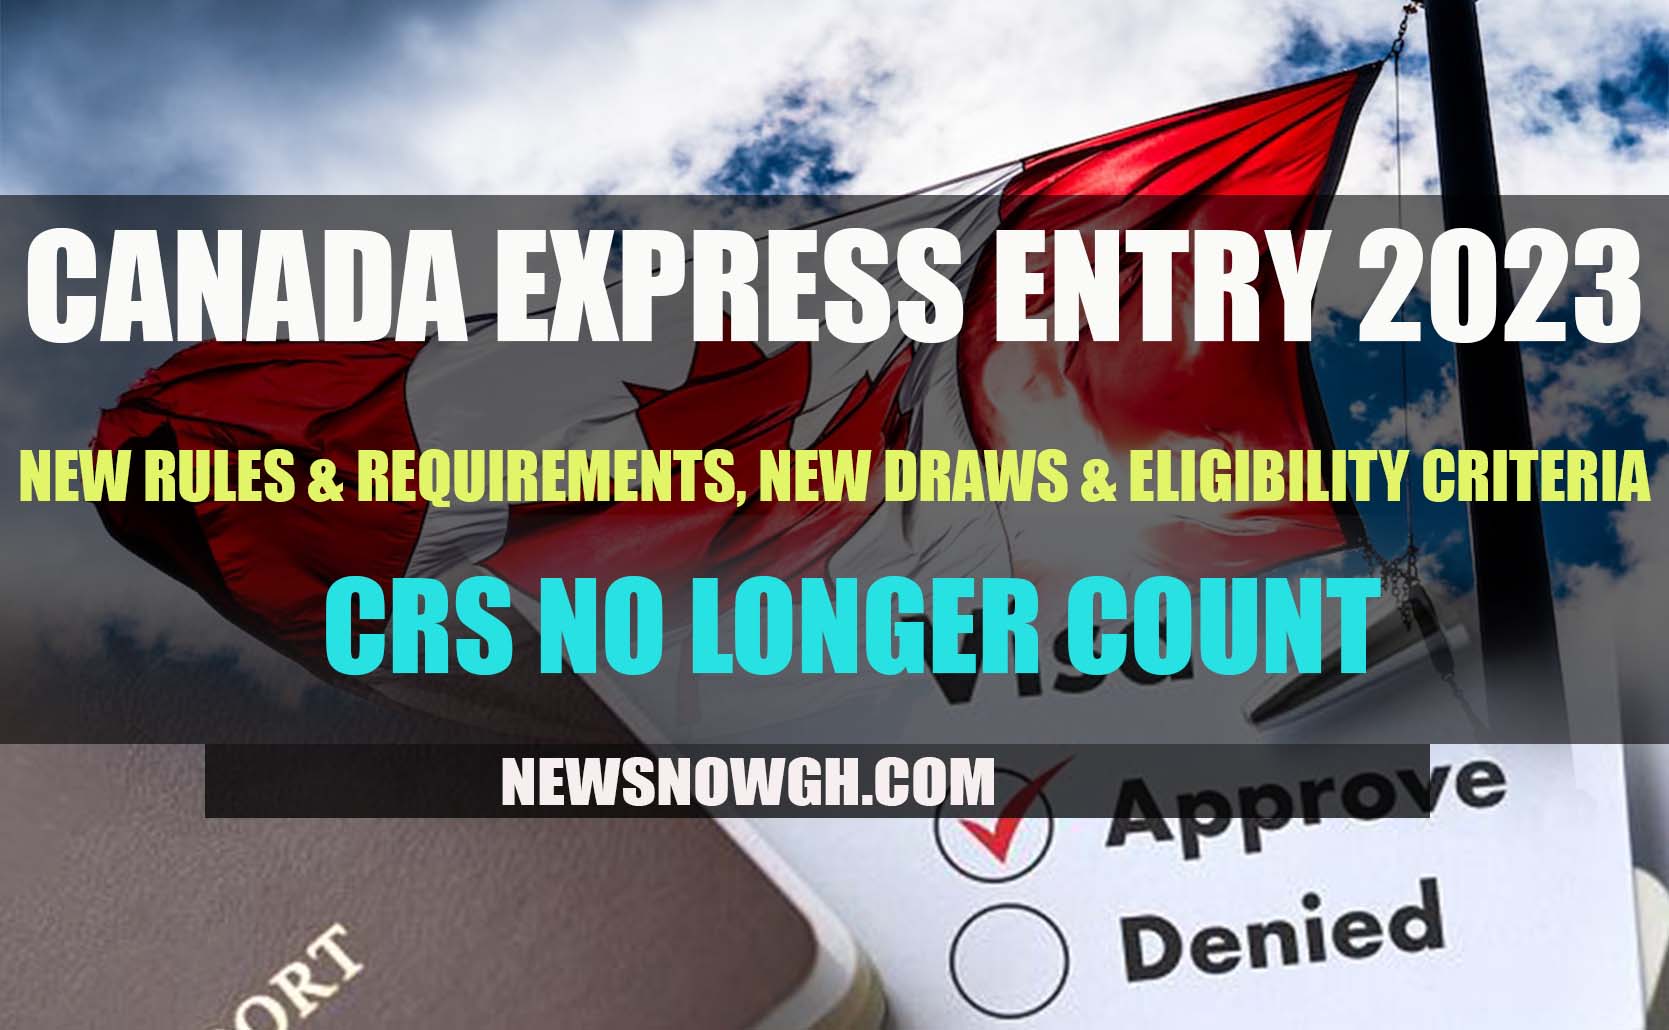 Canada Express Entry 2023 New Rules & Requirements